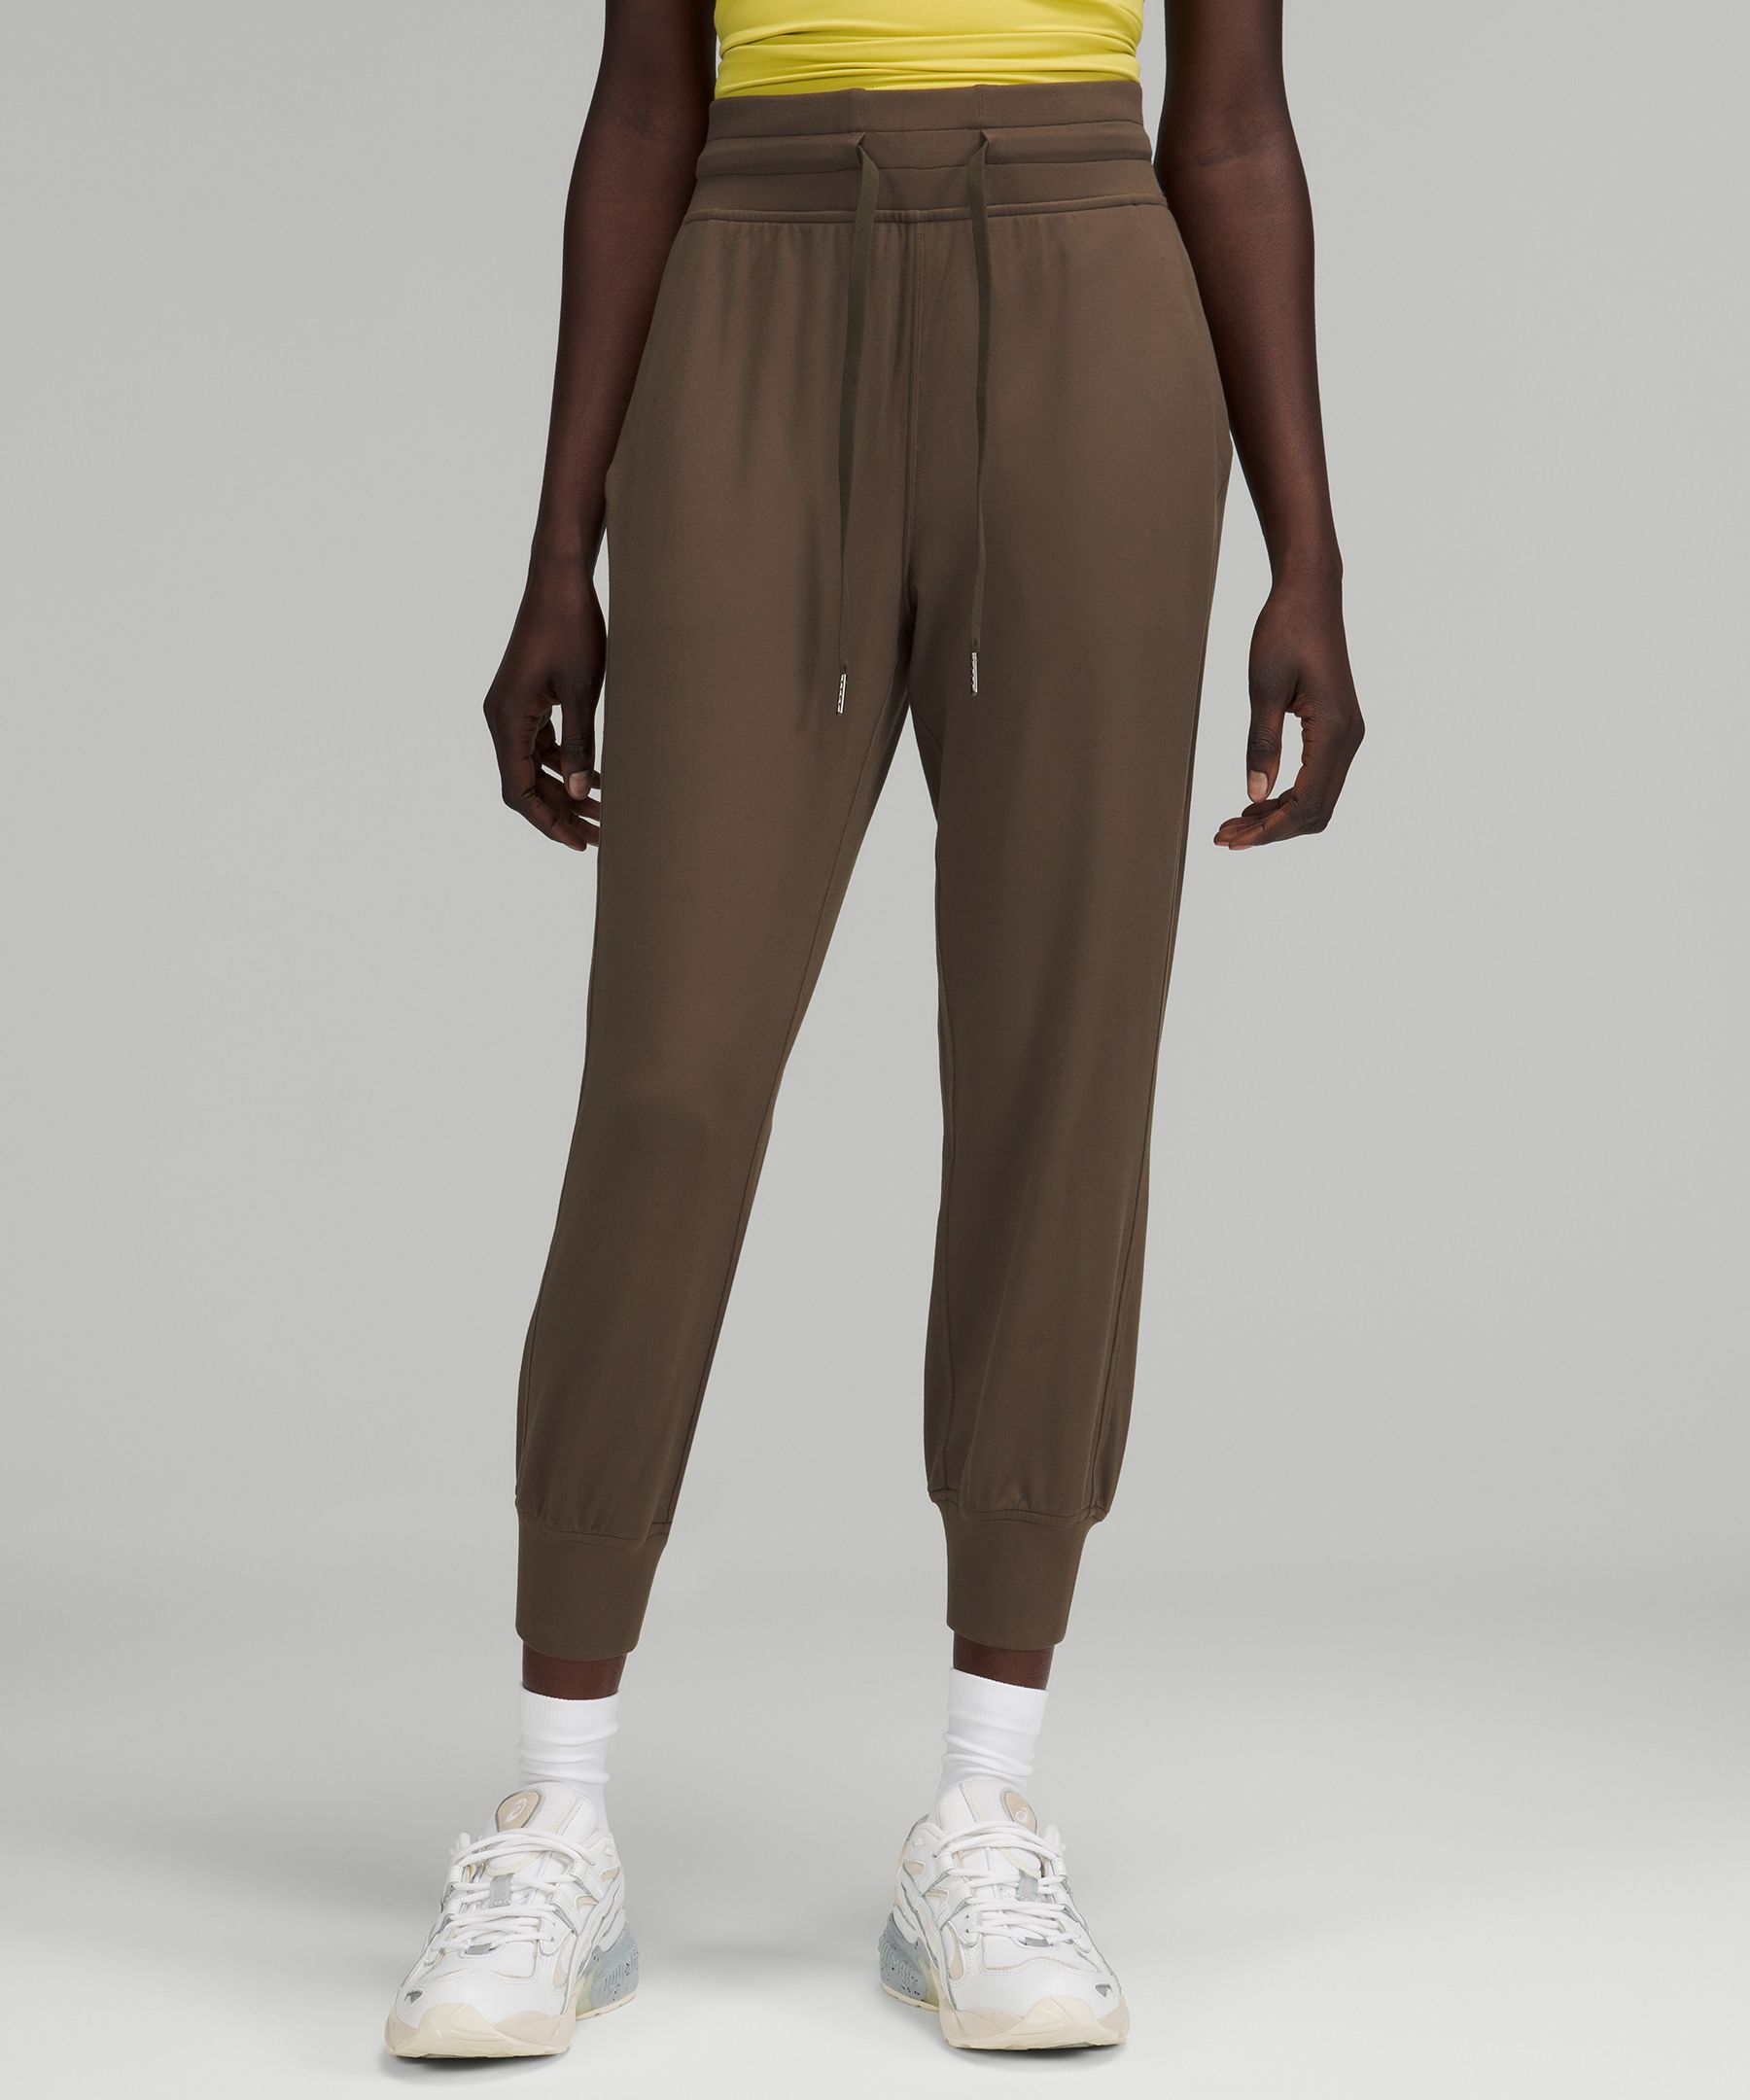 Ready to Rulu High-Rise Cropped Jogger (Heathered Raceway Grey